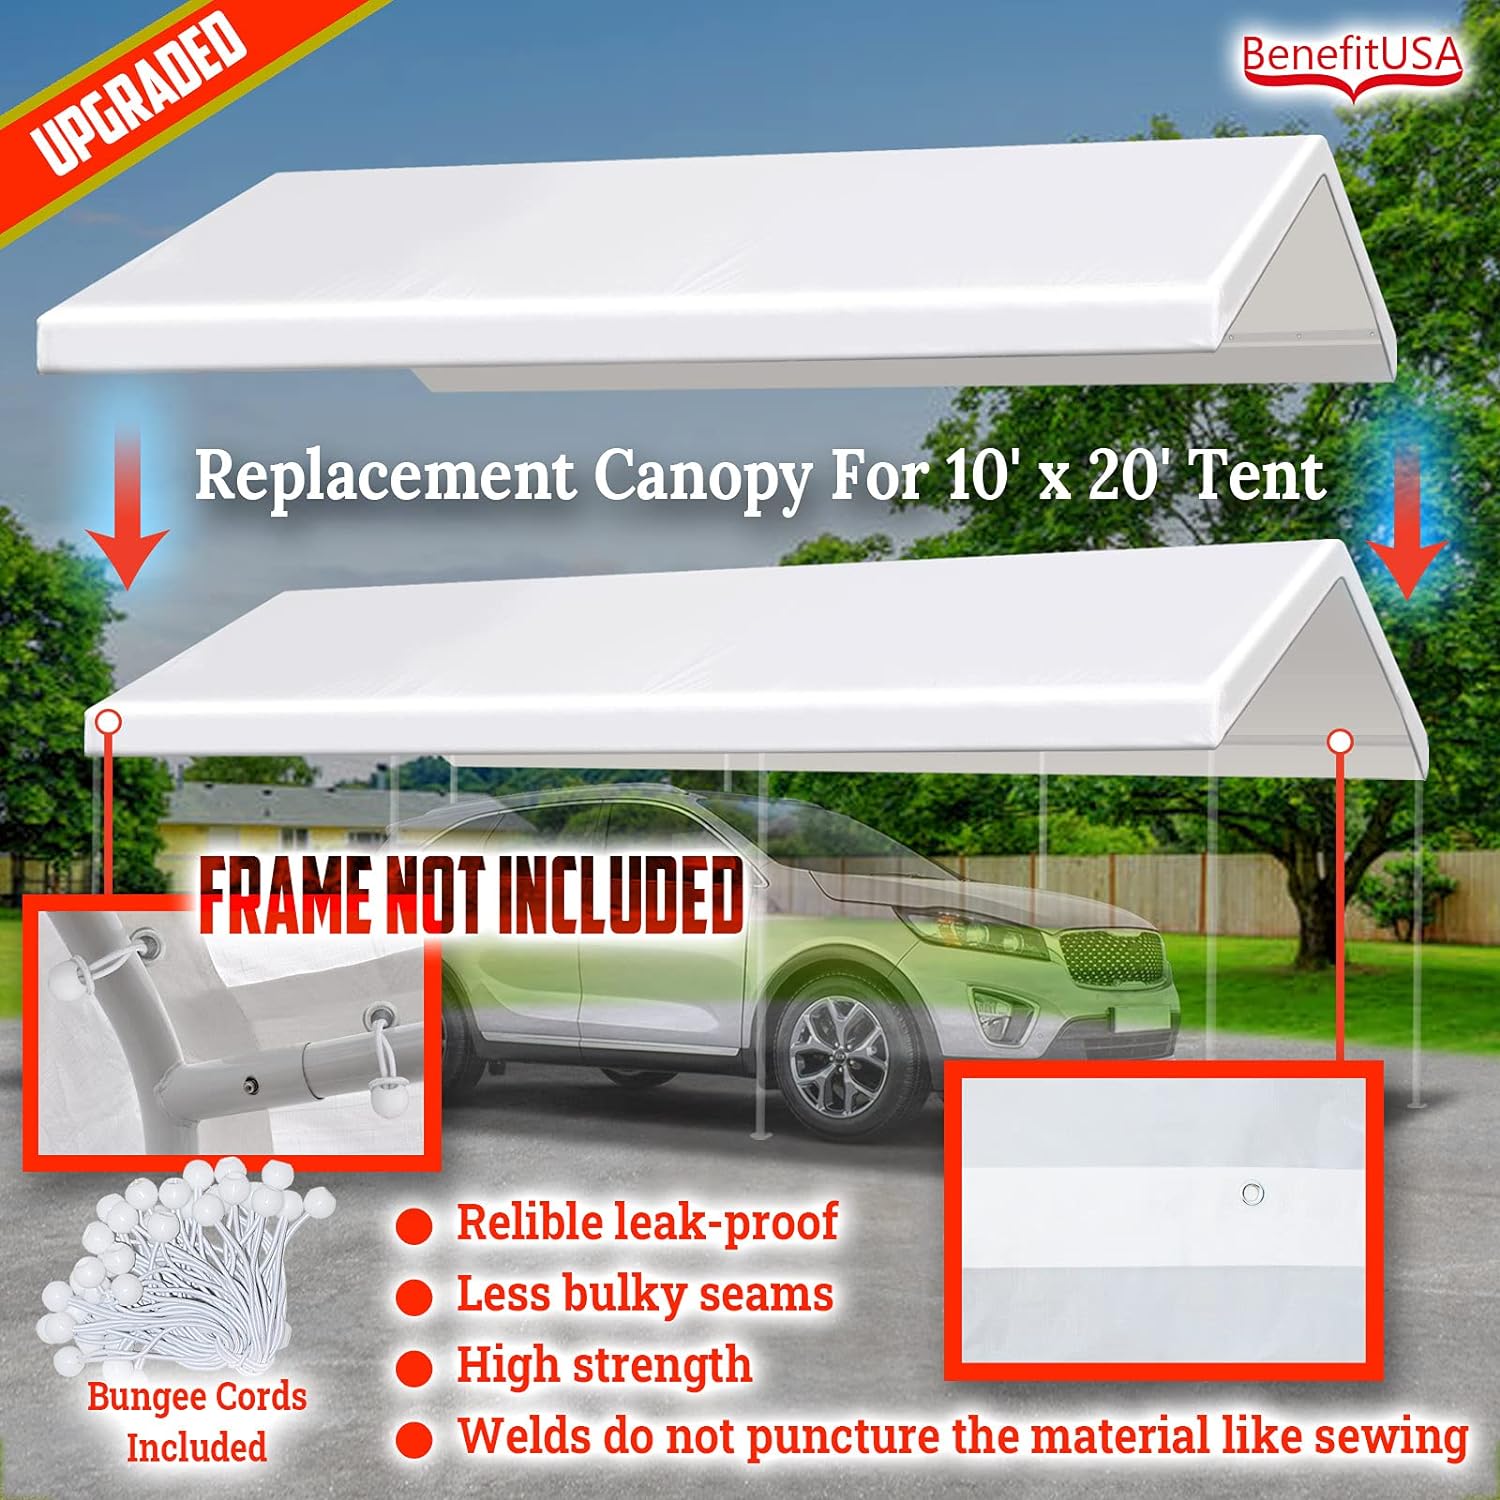 BenefitUSA 10x20' Waterproof Upgraded Carport Replacement Canopy Only Garage Top Cover Tent Shelter Tarp with Ball Bungee Cords,Frame is n